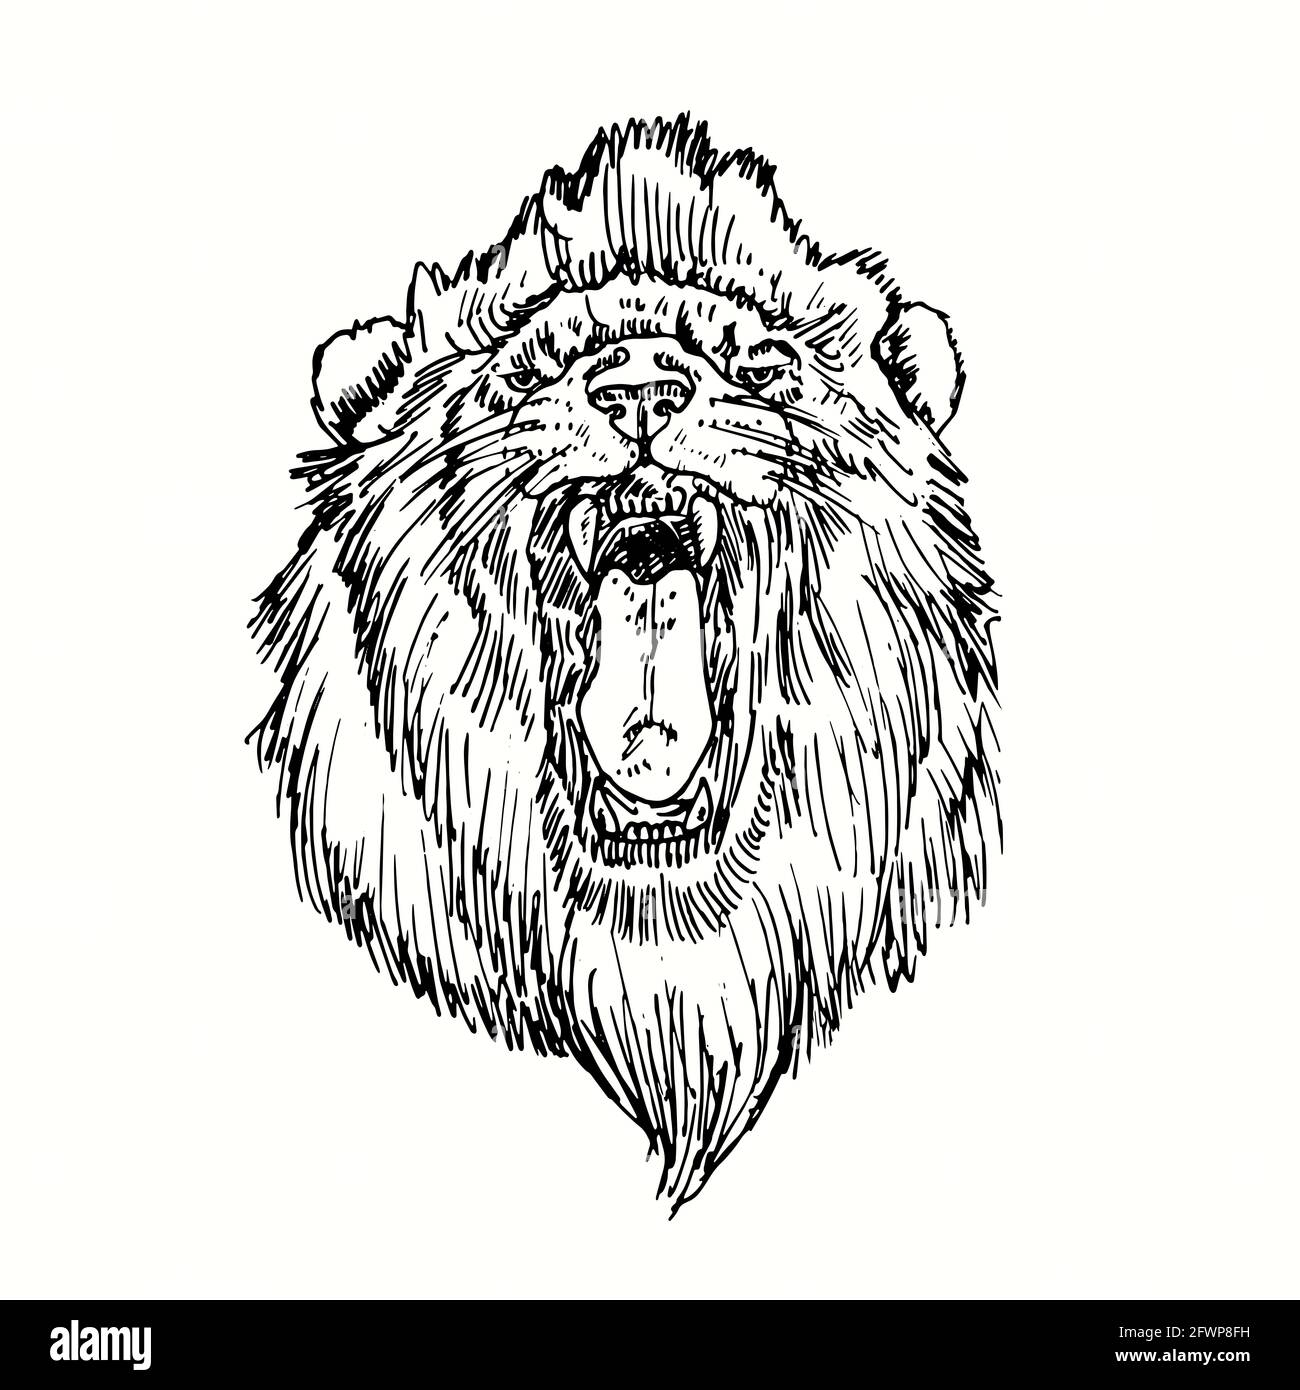 How to draw a Lion standing | Wild Animals - Sketchok easy drawing guides-saigonsouth.com.vn